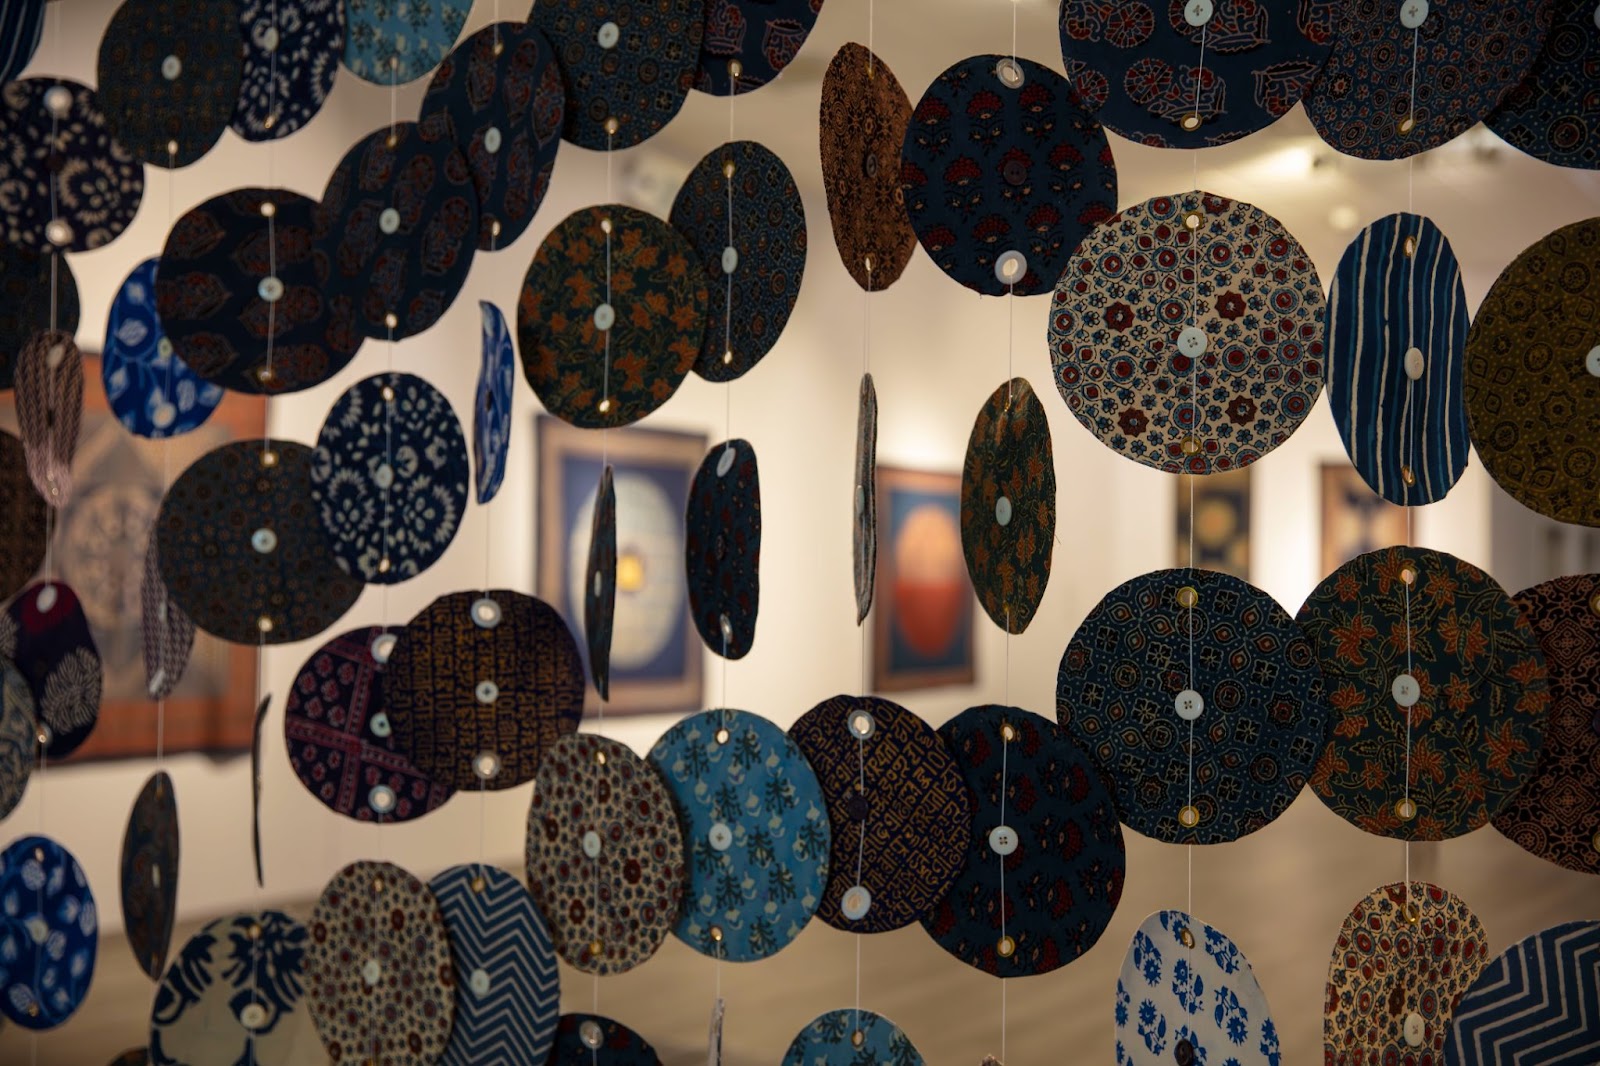 Image: Installation View, Indigo: The Blue Gold, 2023. Migrated Communities hangs on a wall of the exhibition, with Homage to the Farmers of Champaran, 1917-1918 in the foreground. The latter piece takes the shape of many patterned circles hanging in the space. Courtesy: South Asia Institute.